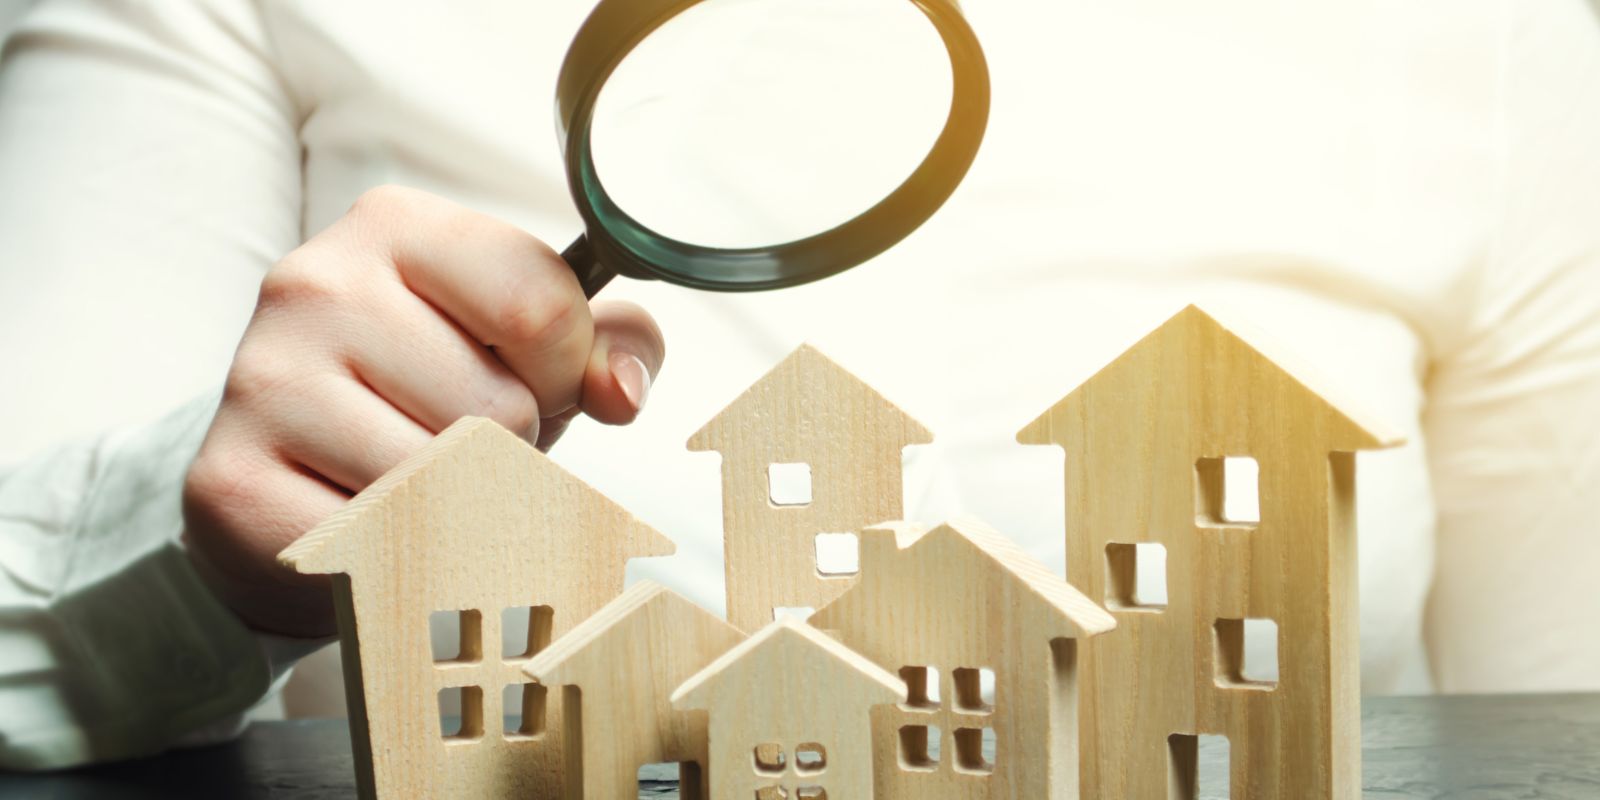 Person holding a magnifying glass above multiple wooden houses